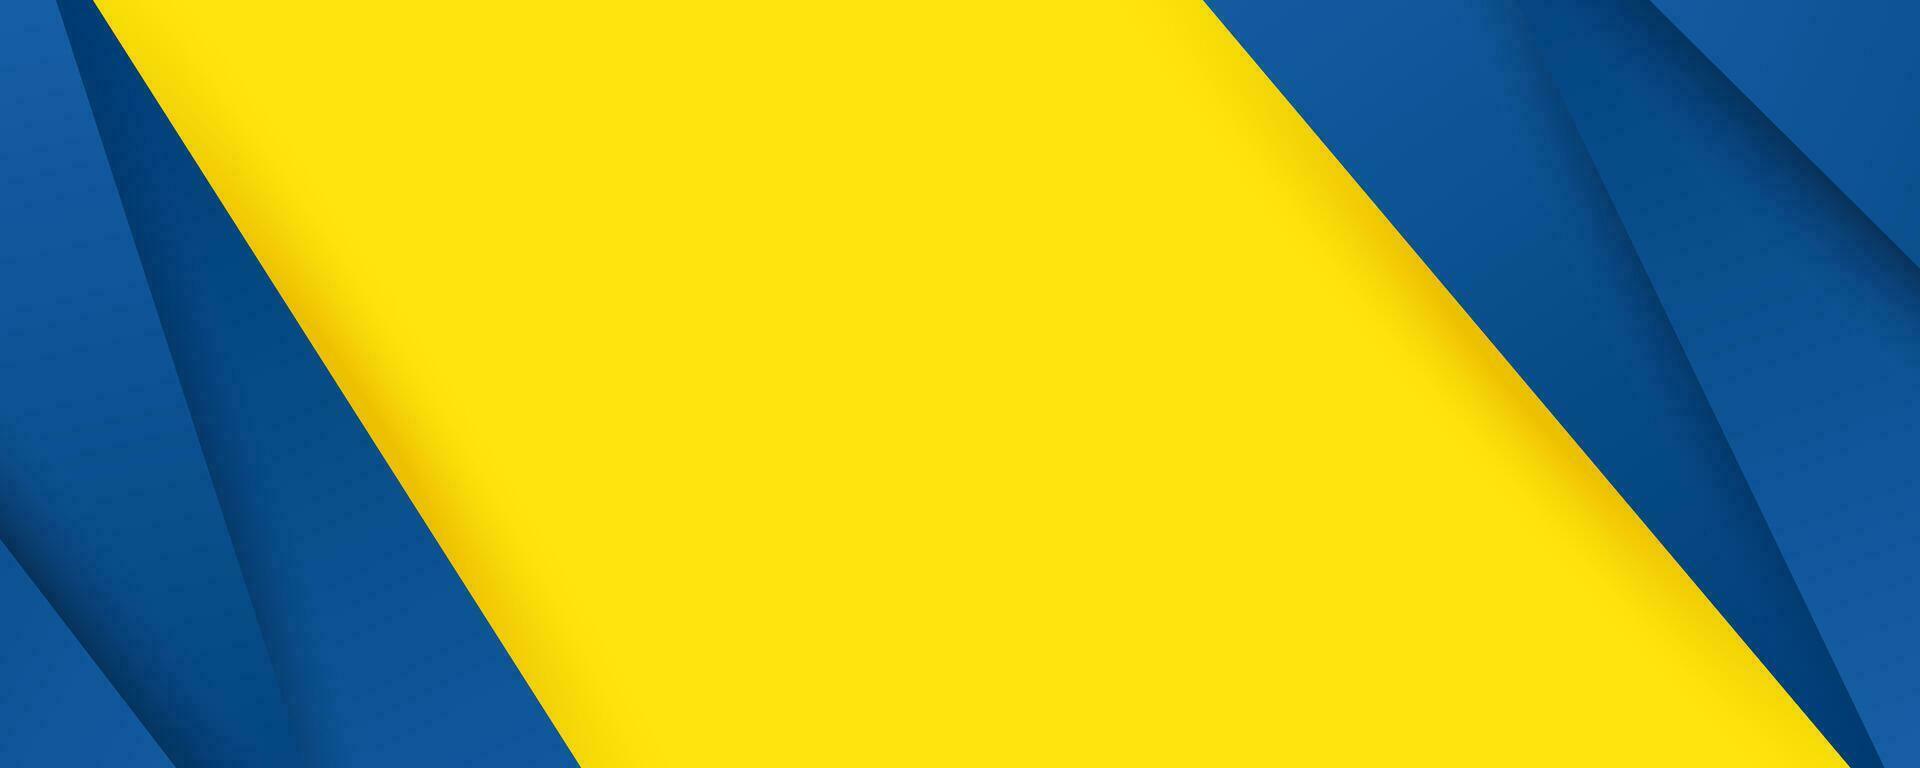 yellow and blue Trendy abstract banner yellow and blue background design vector